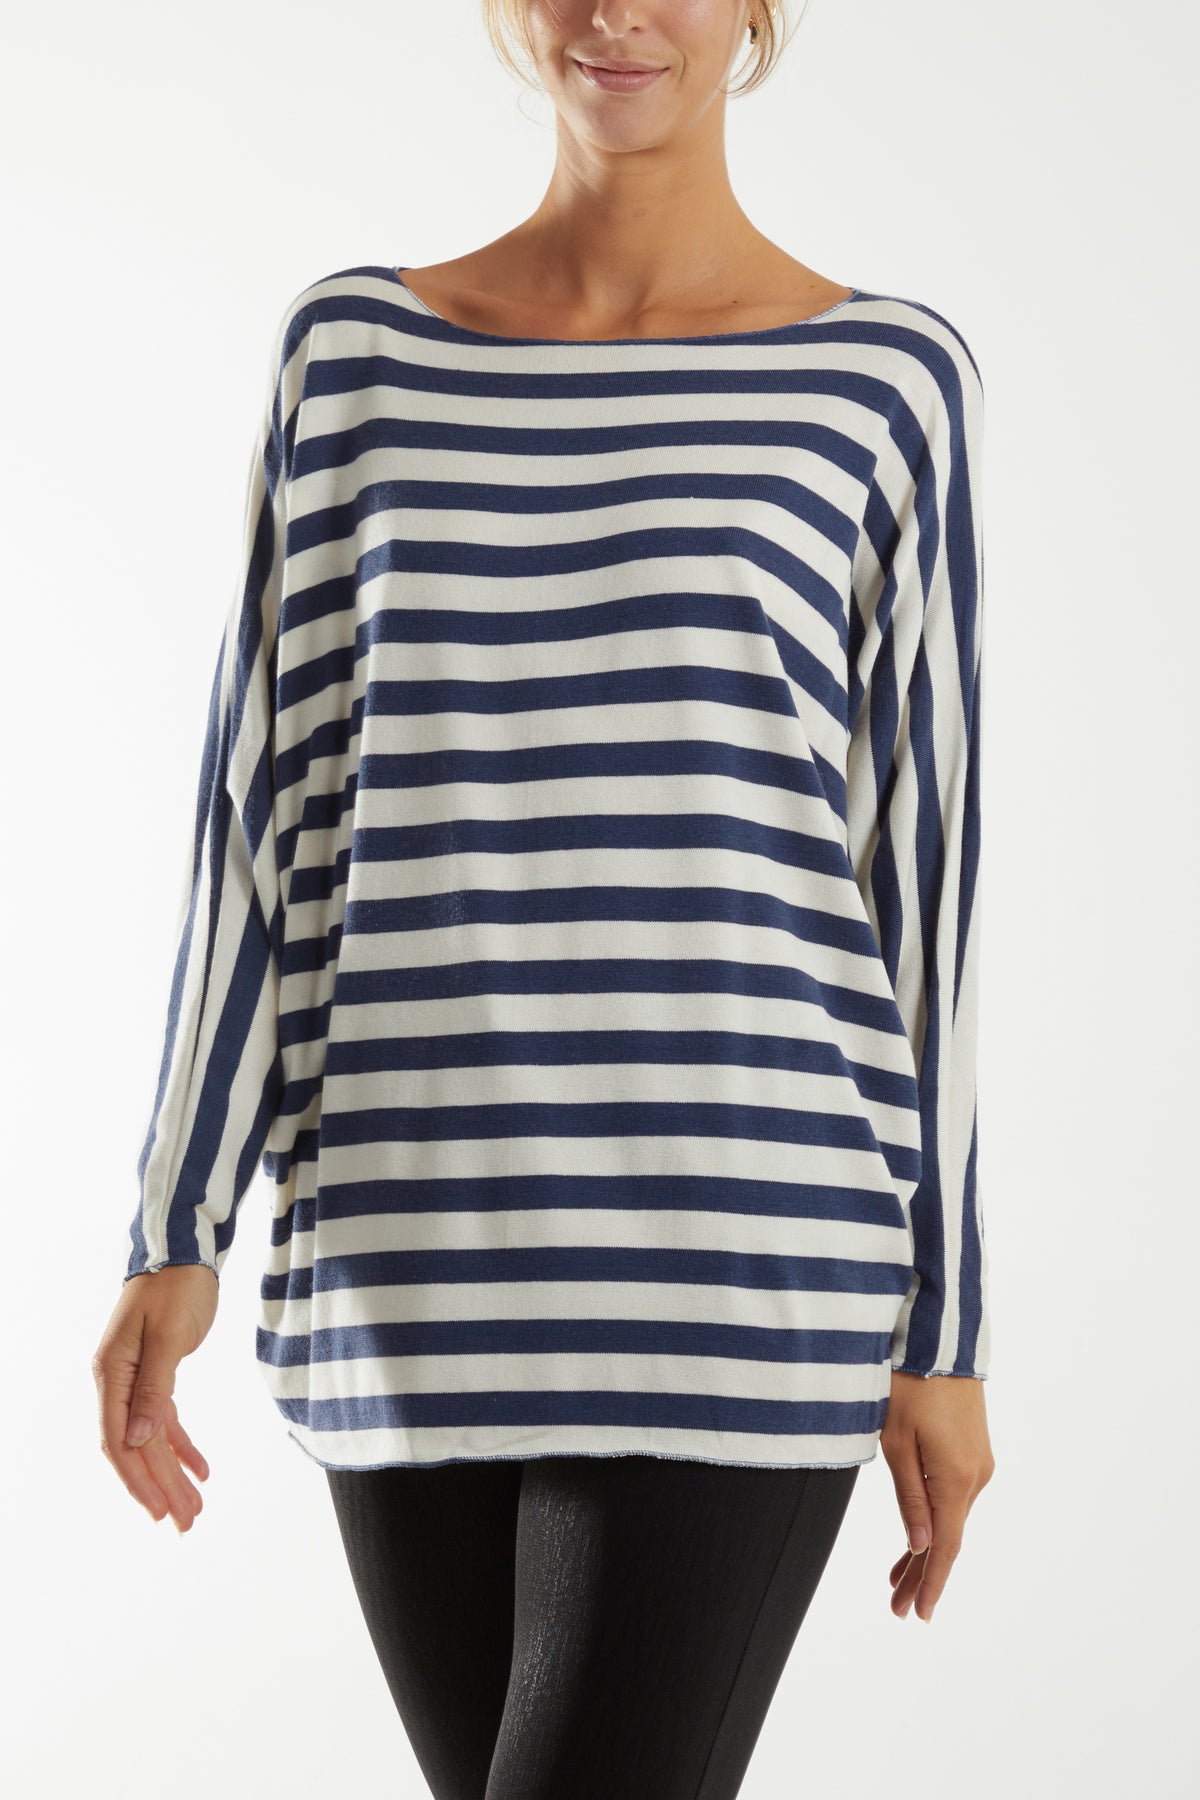 Striped Batwing Long Sleeve Top